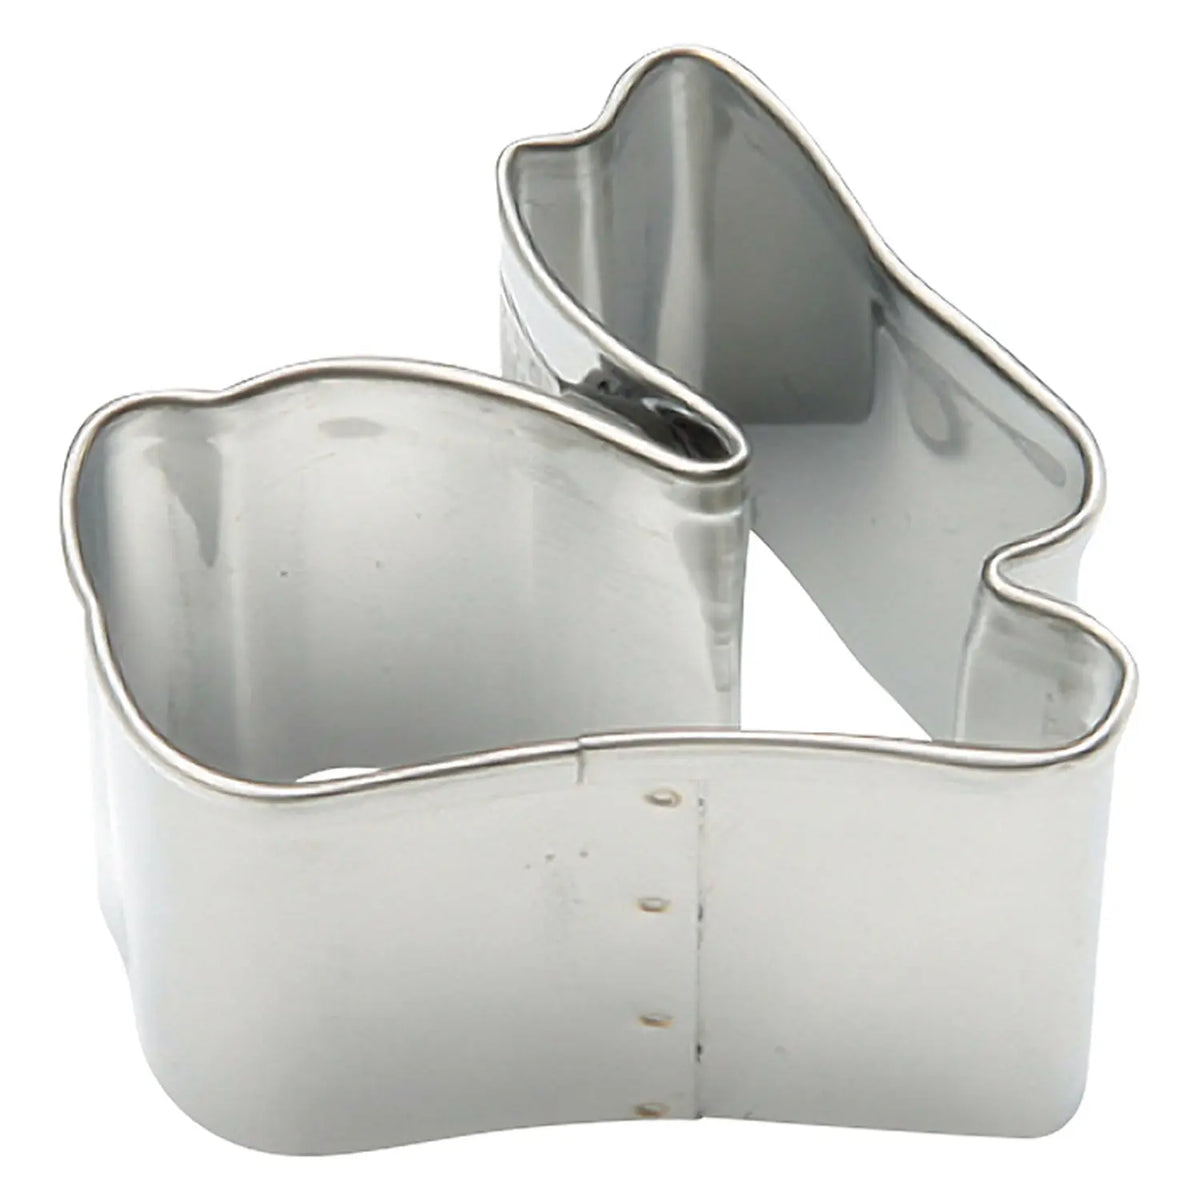 TIGERCROWN Cake Land Stainless Steel Cookie Cutter Rabbit